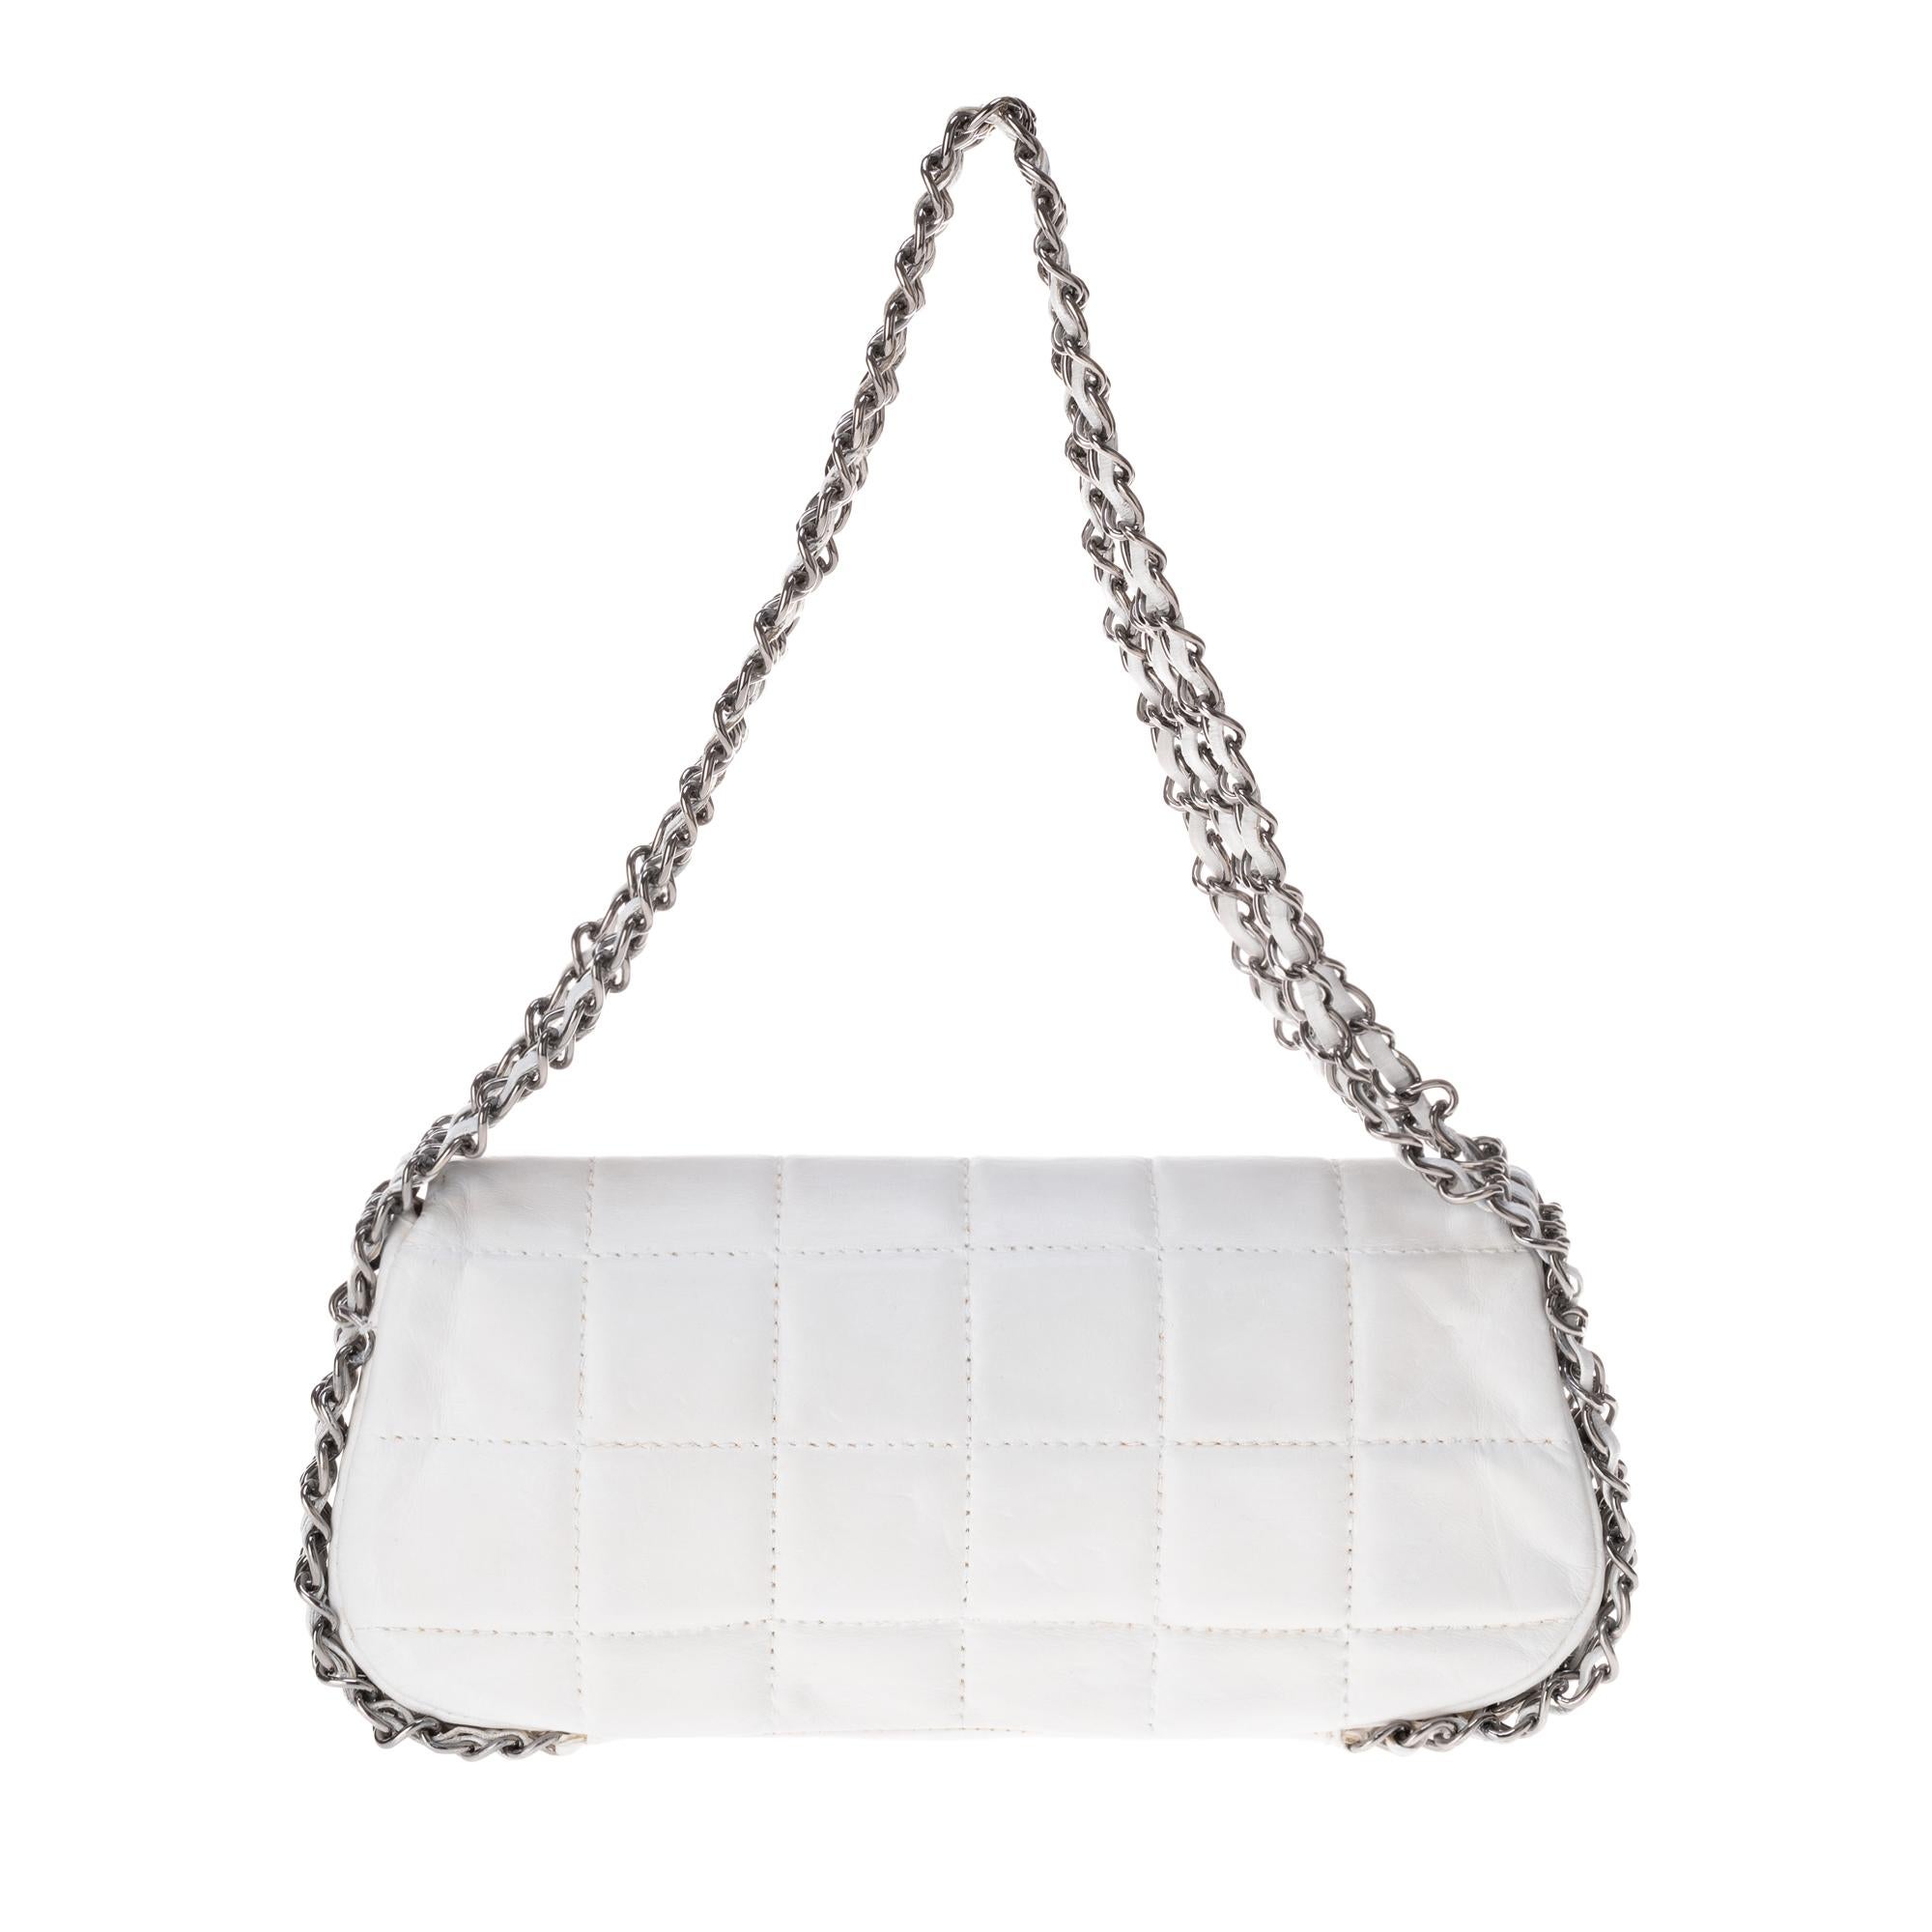 Beautiful Chanel Parfums bag in white quilted lambskin, triple silver metal chain interlaced with white lambskin leather allowing carrying by hand or shoulder.
Silver metal CC-engraved closure on flap by silver metal turnstile.
Interior monogrammed